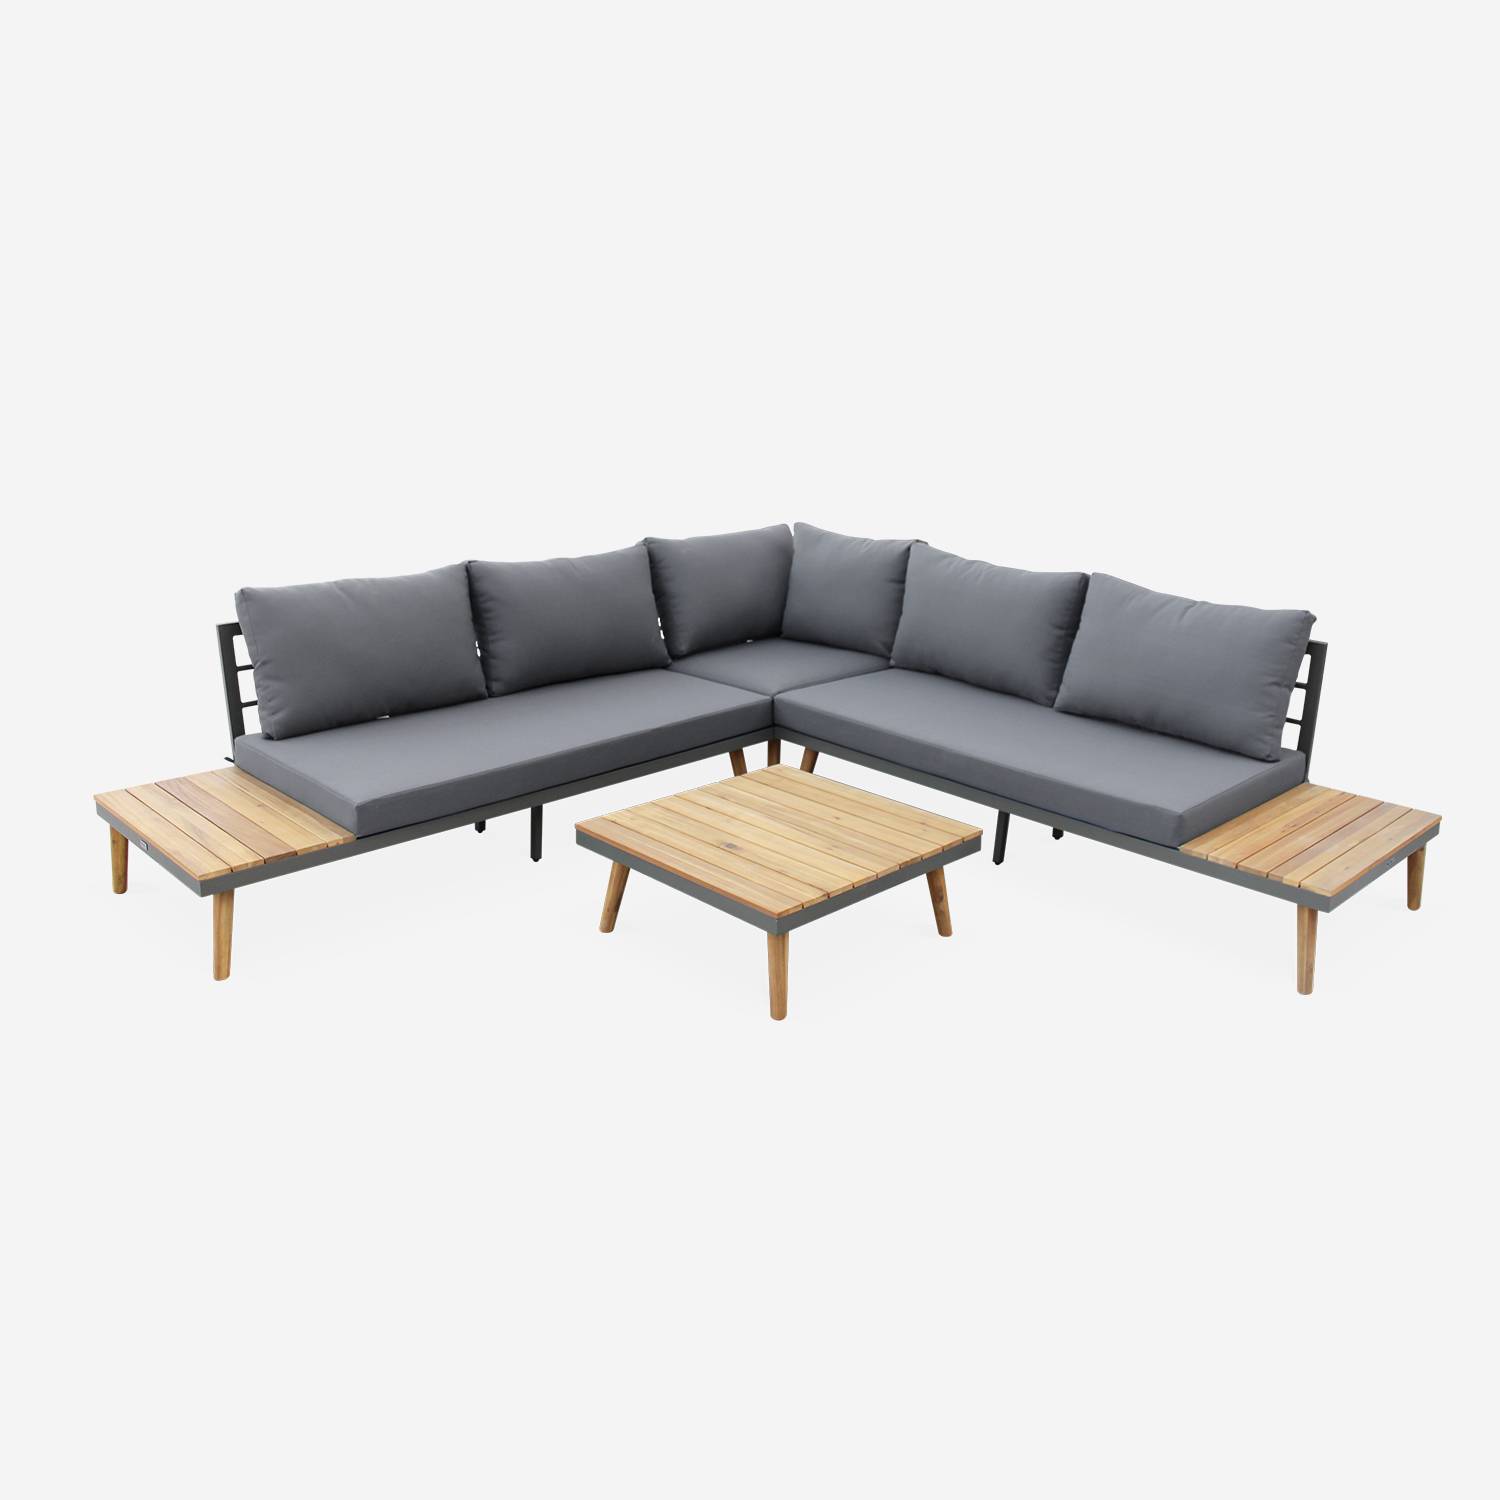 5-seater wooden outdoor sofa - Buenos Aires - Corner sofa with coffee and side tables in acacia wood, aluminium frame, Scandinavian-style legs - Buenos Aires - Grey cushions, Grey structure Photo2